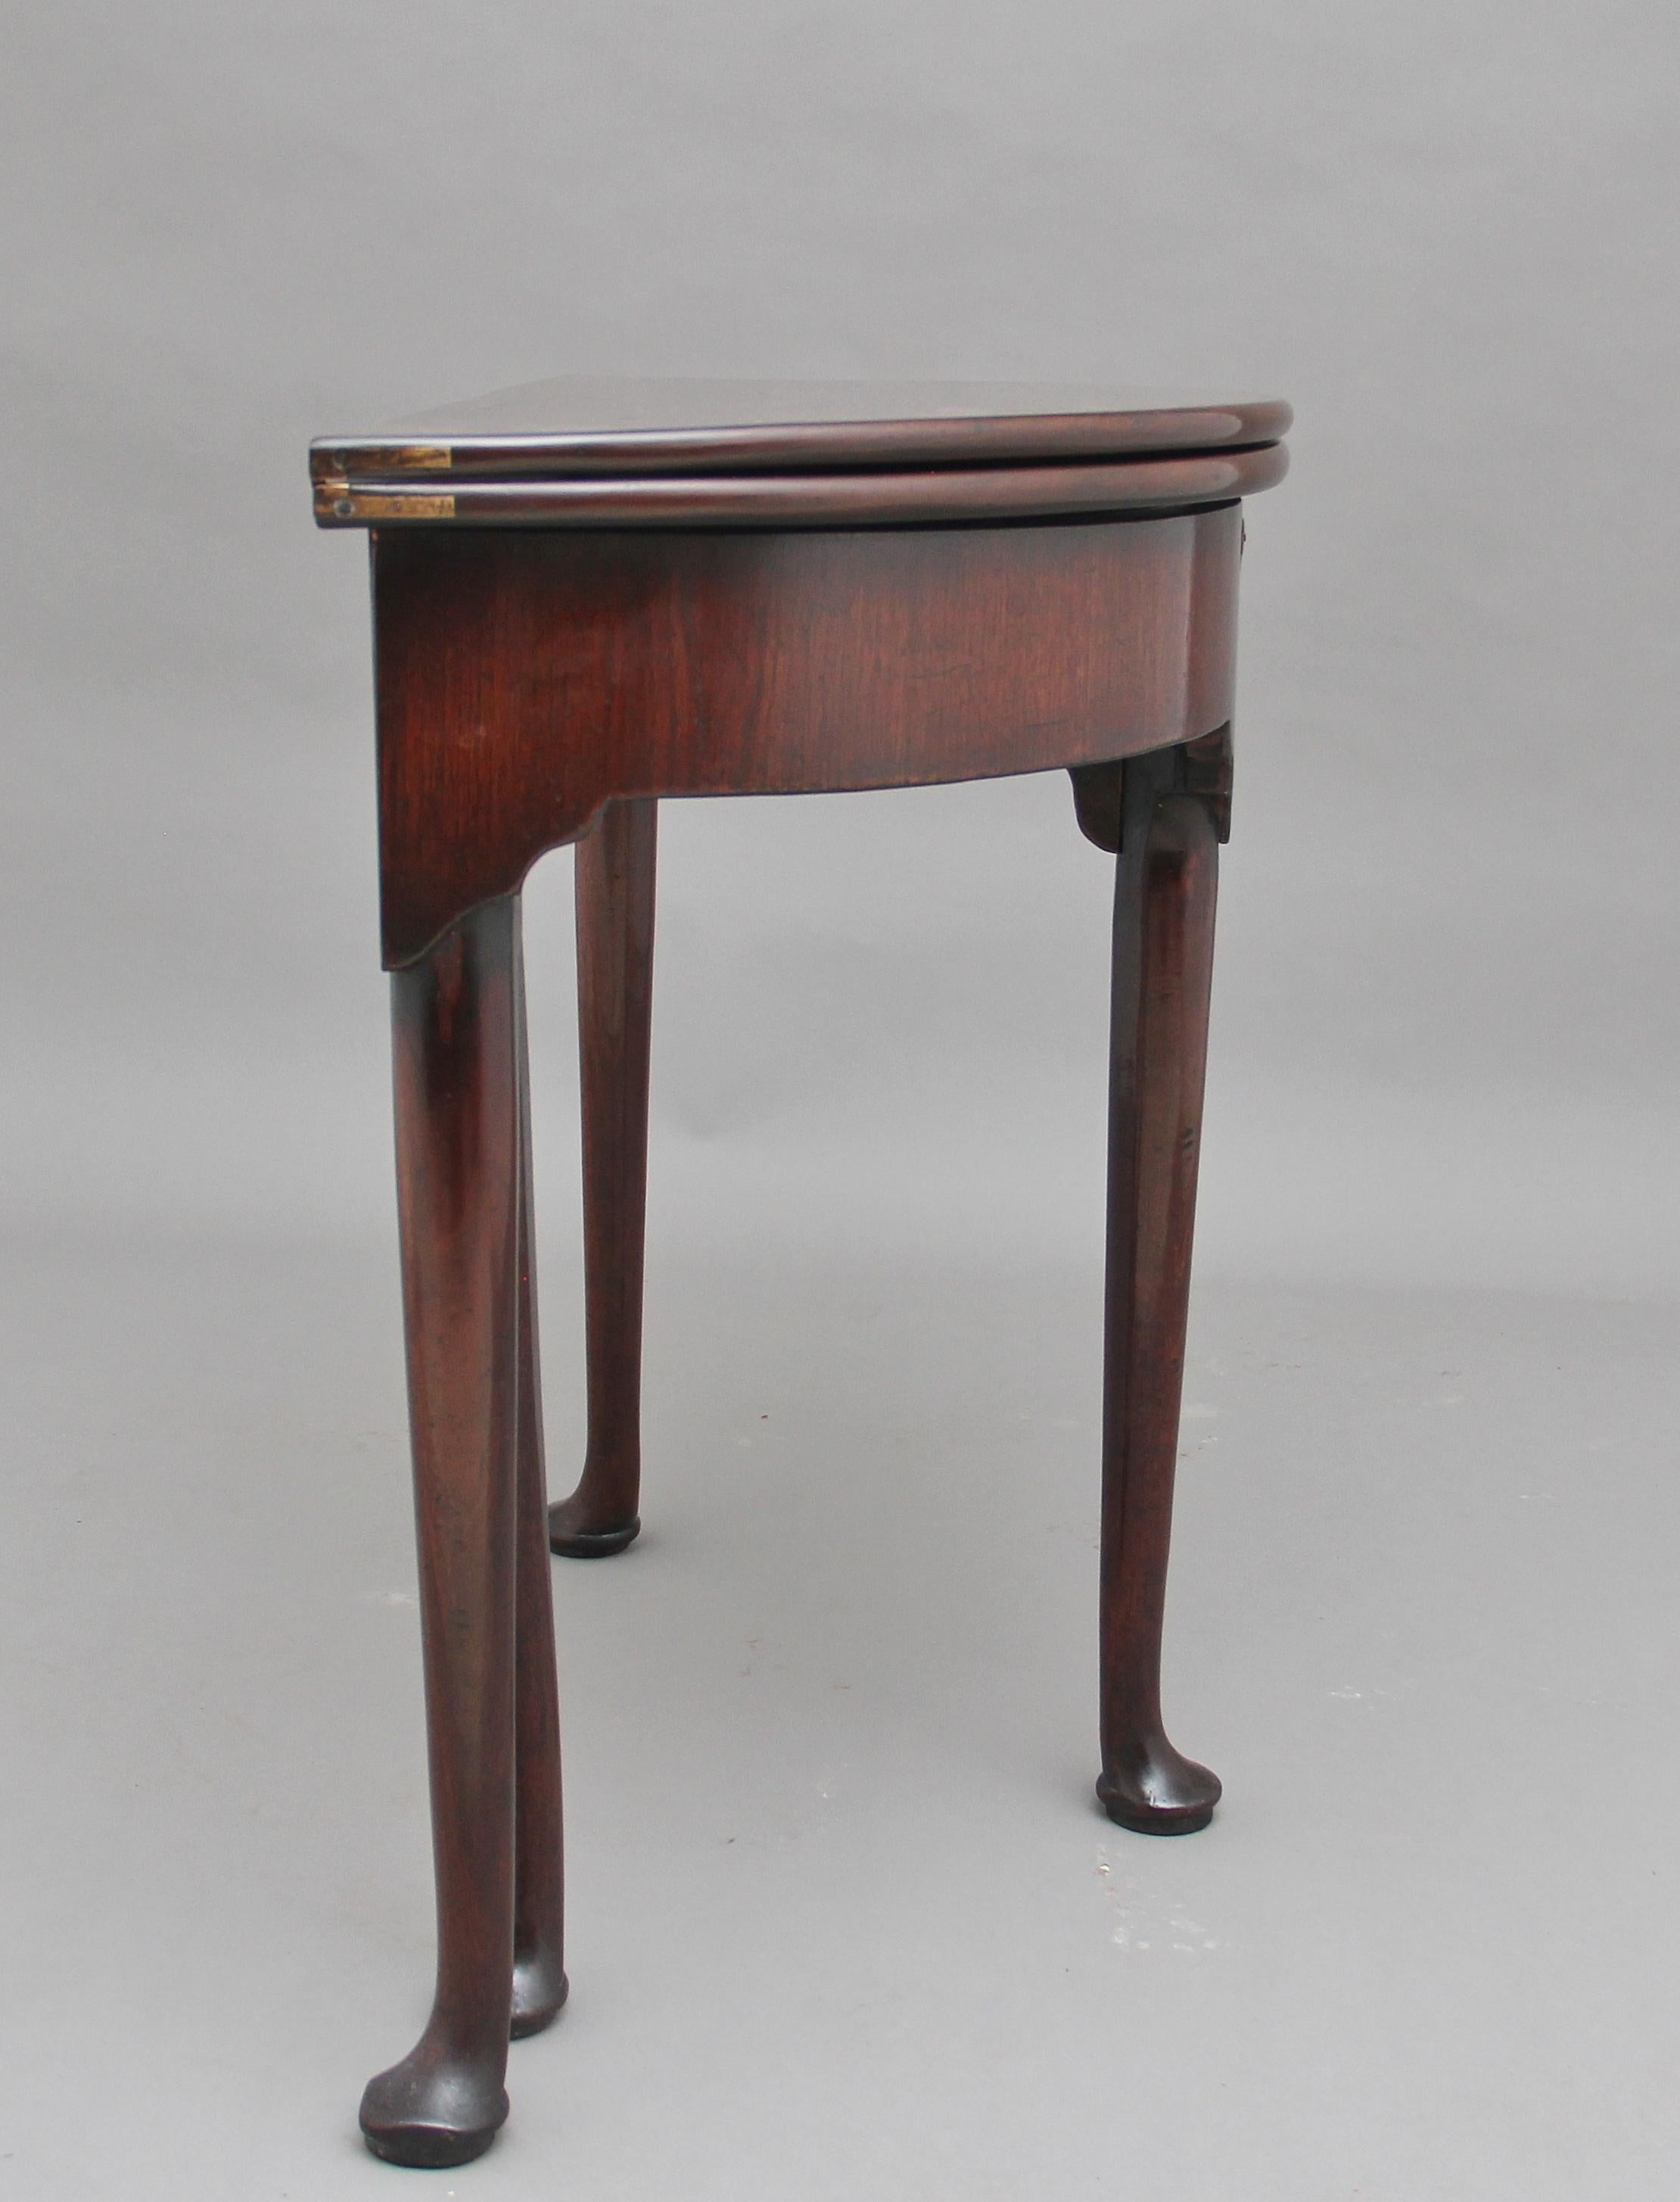 18th century mahogany demilune tea table, the double fold over top encloses an spacious compartment, standing on four slender turned legs terminating on pad feet, the table has a lovely rich warm color, circa 1780.